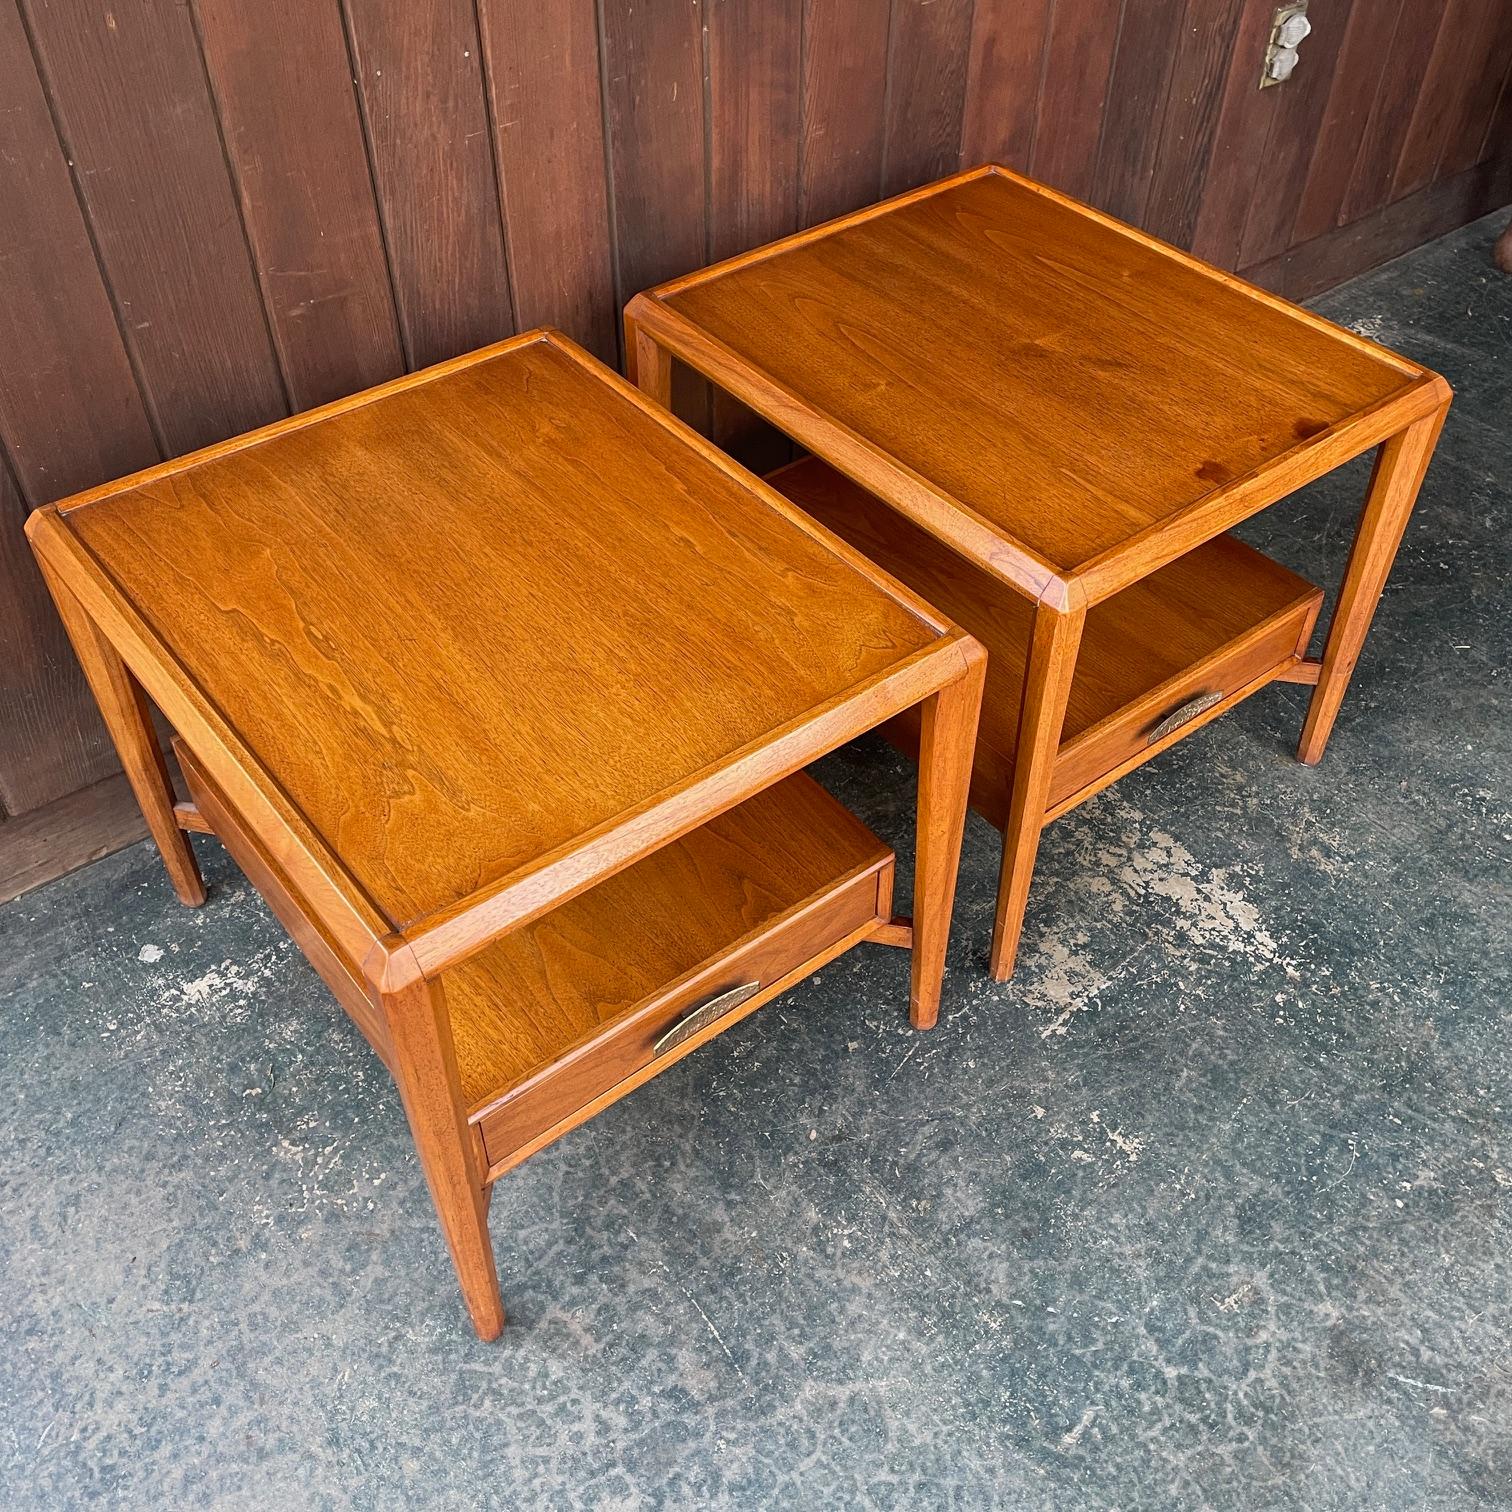 Lacquered 1960s Pair Angular Mid-Century Modern Nightstands Endtables Heritage Perennian